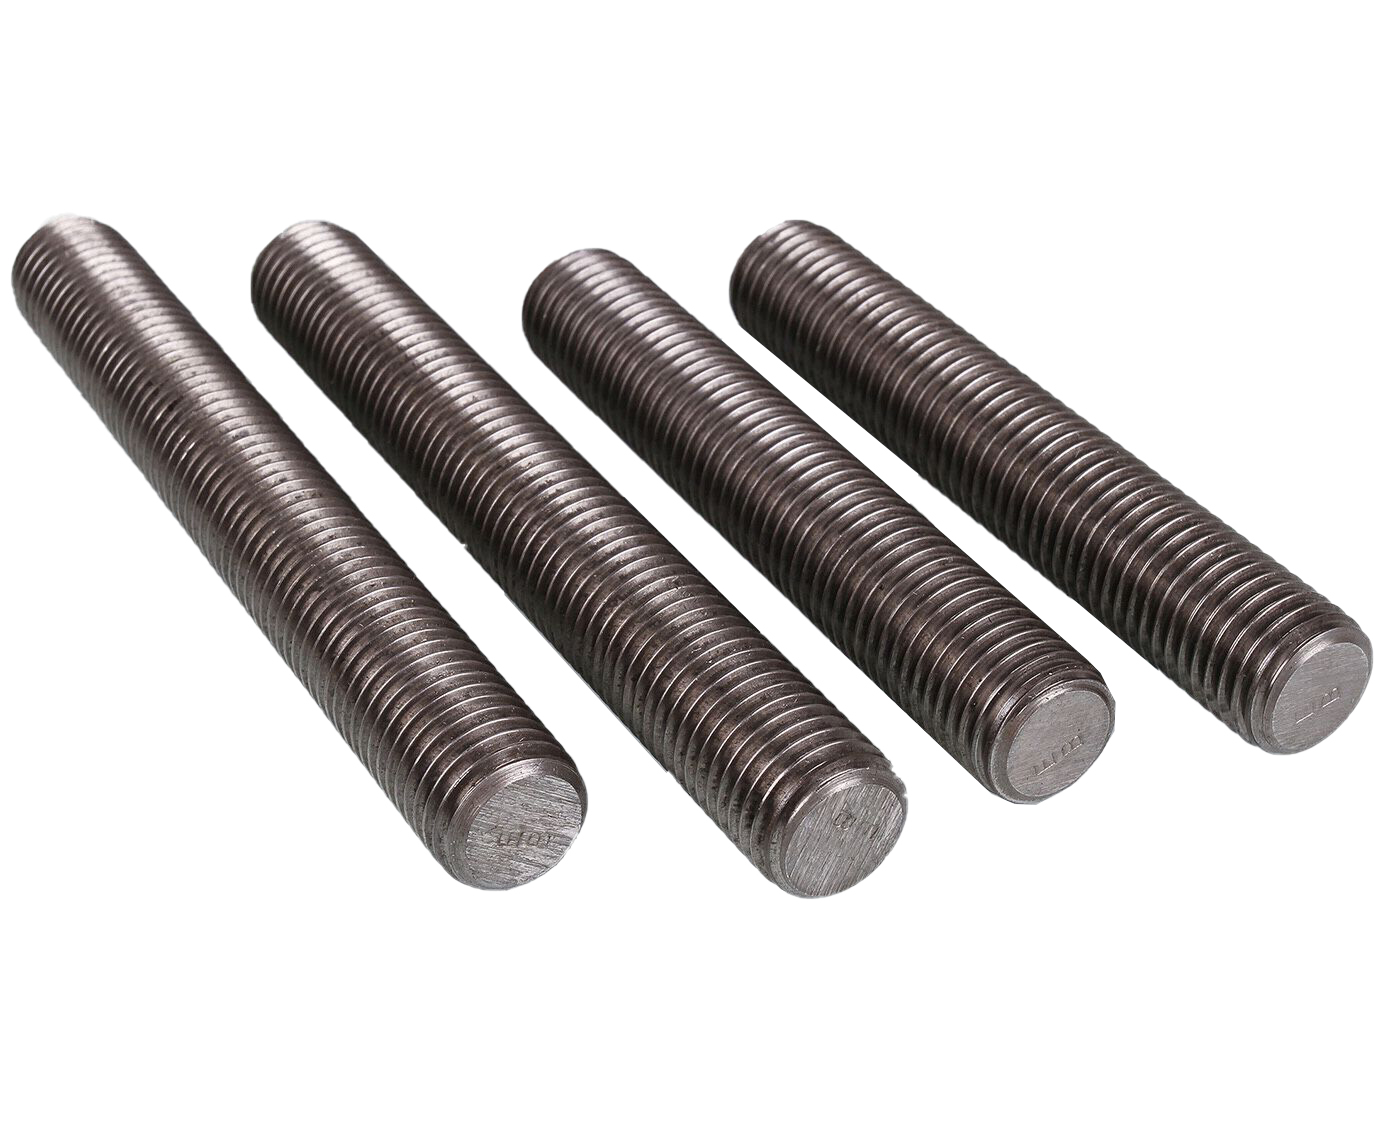 Threaded Metal Studs and Rods B7 Manufacturer